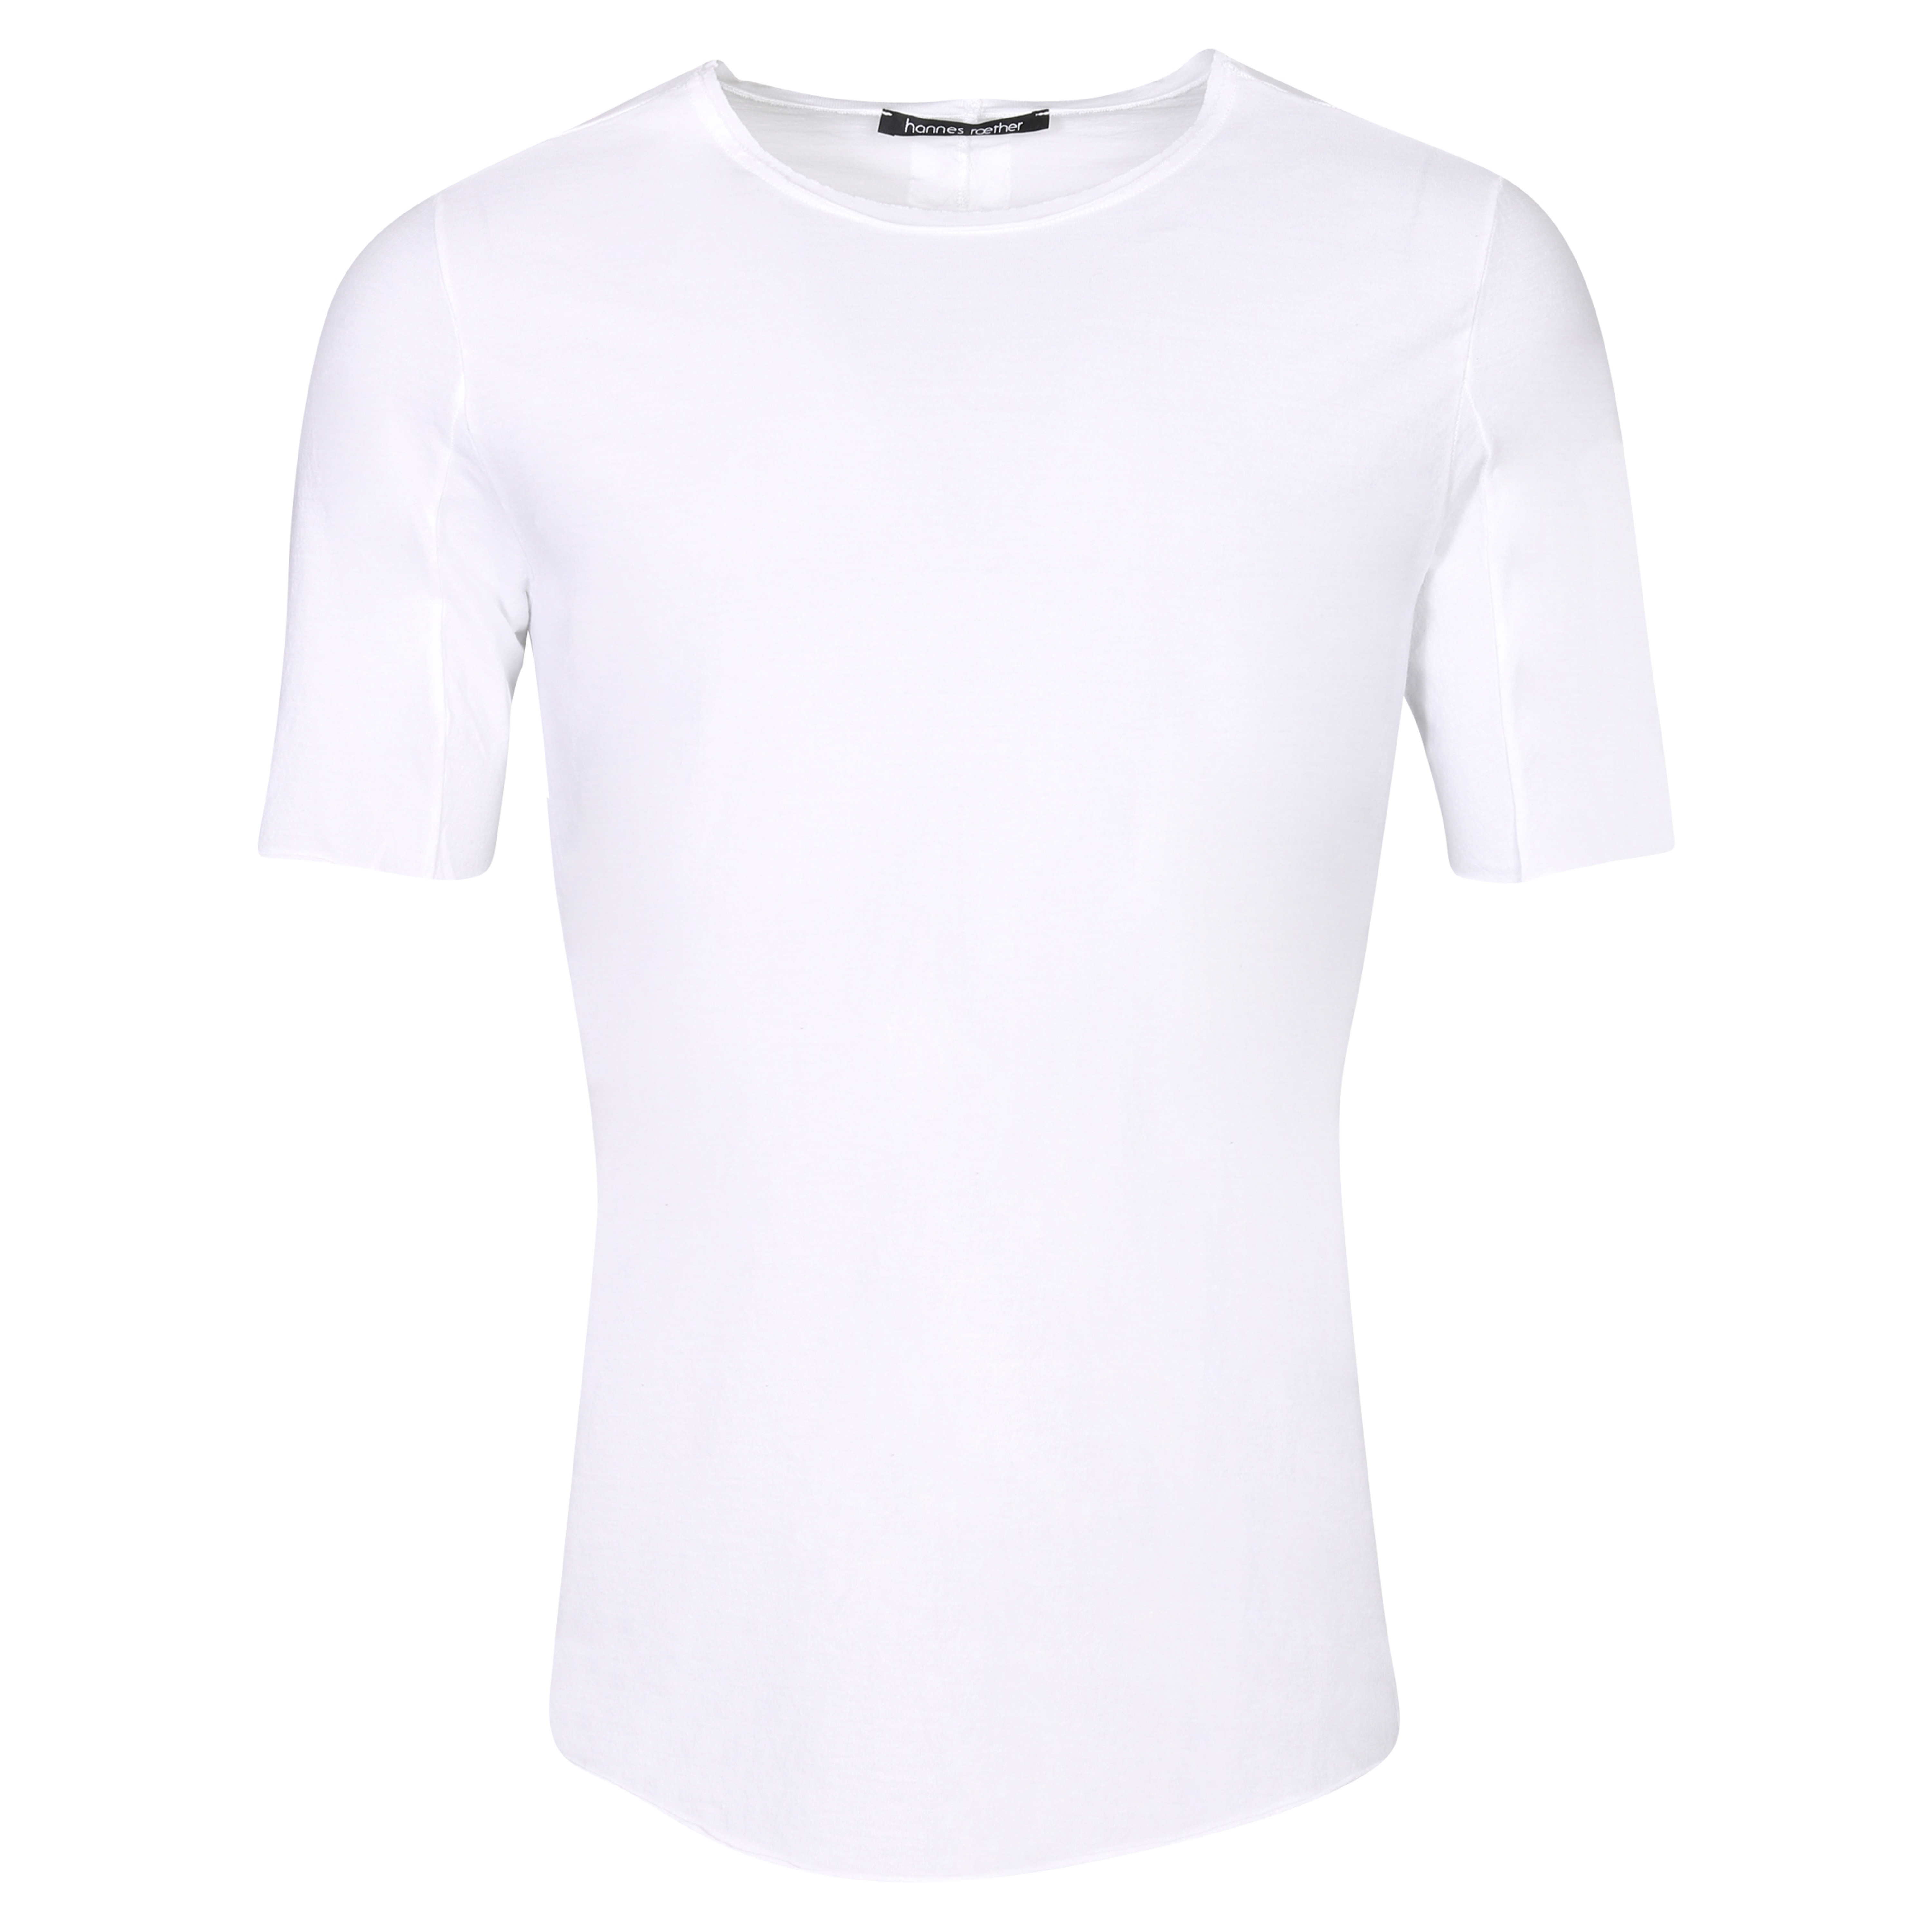 Hannes Roether Crewneck T-Shirt in White 3XL